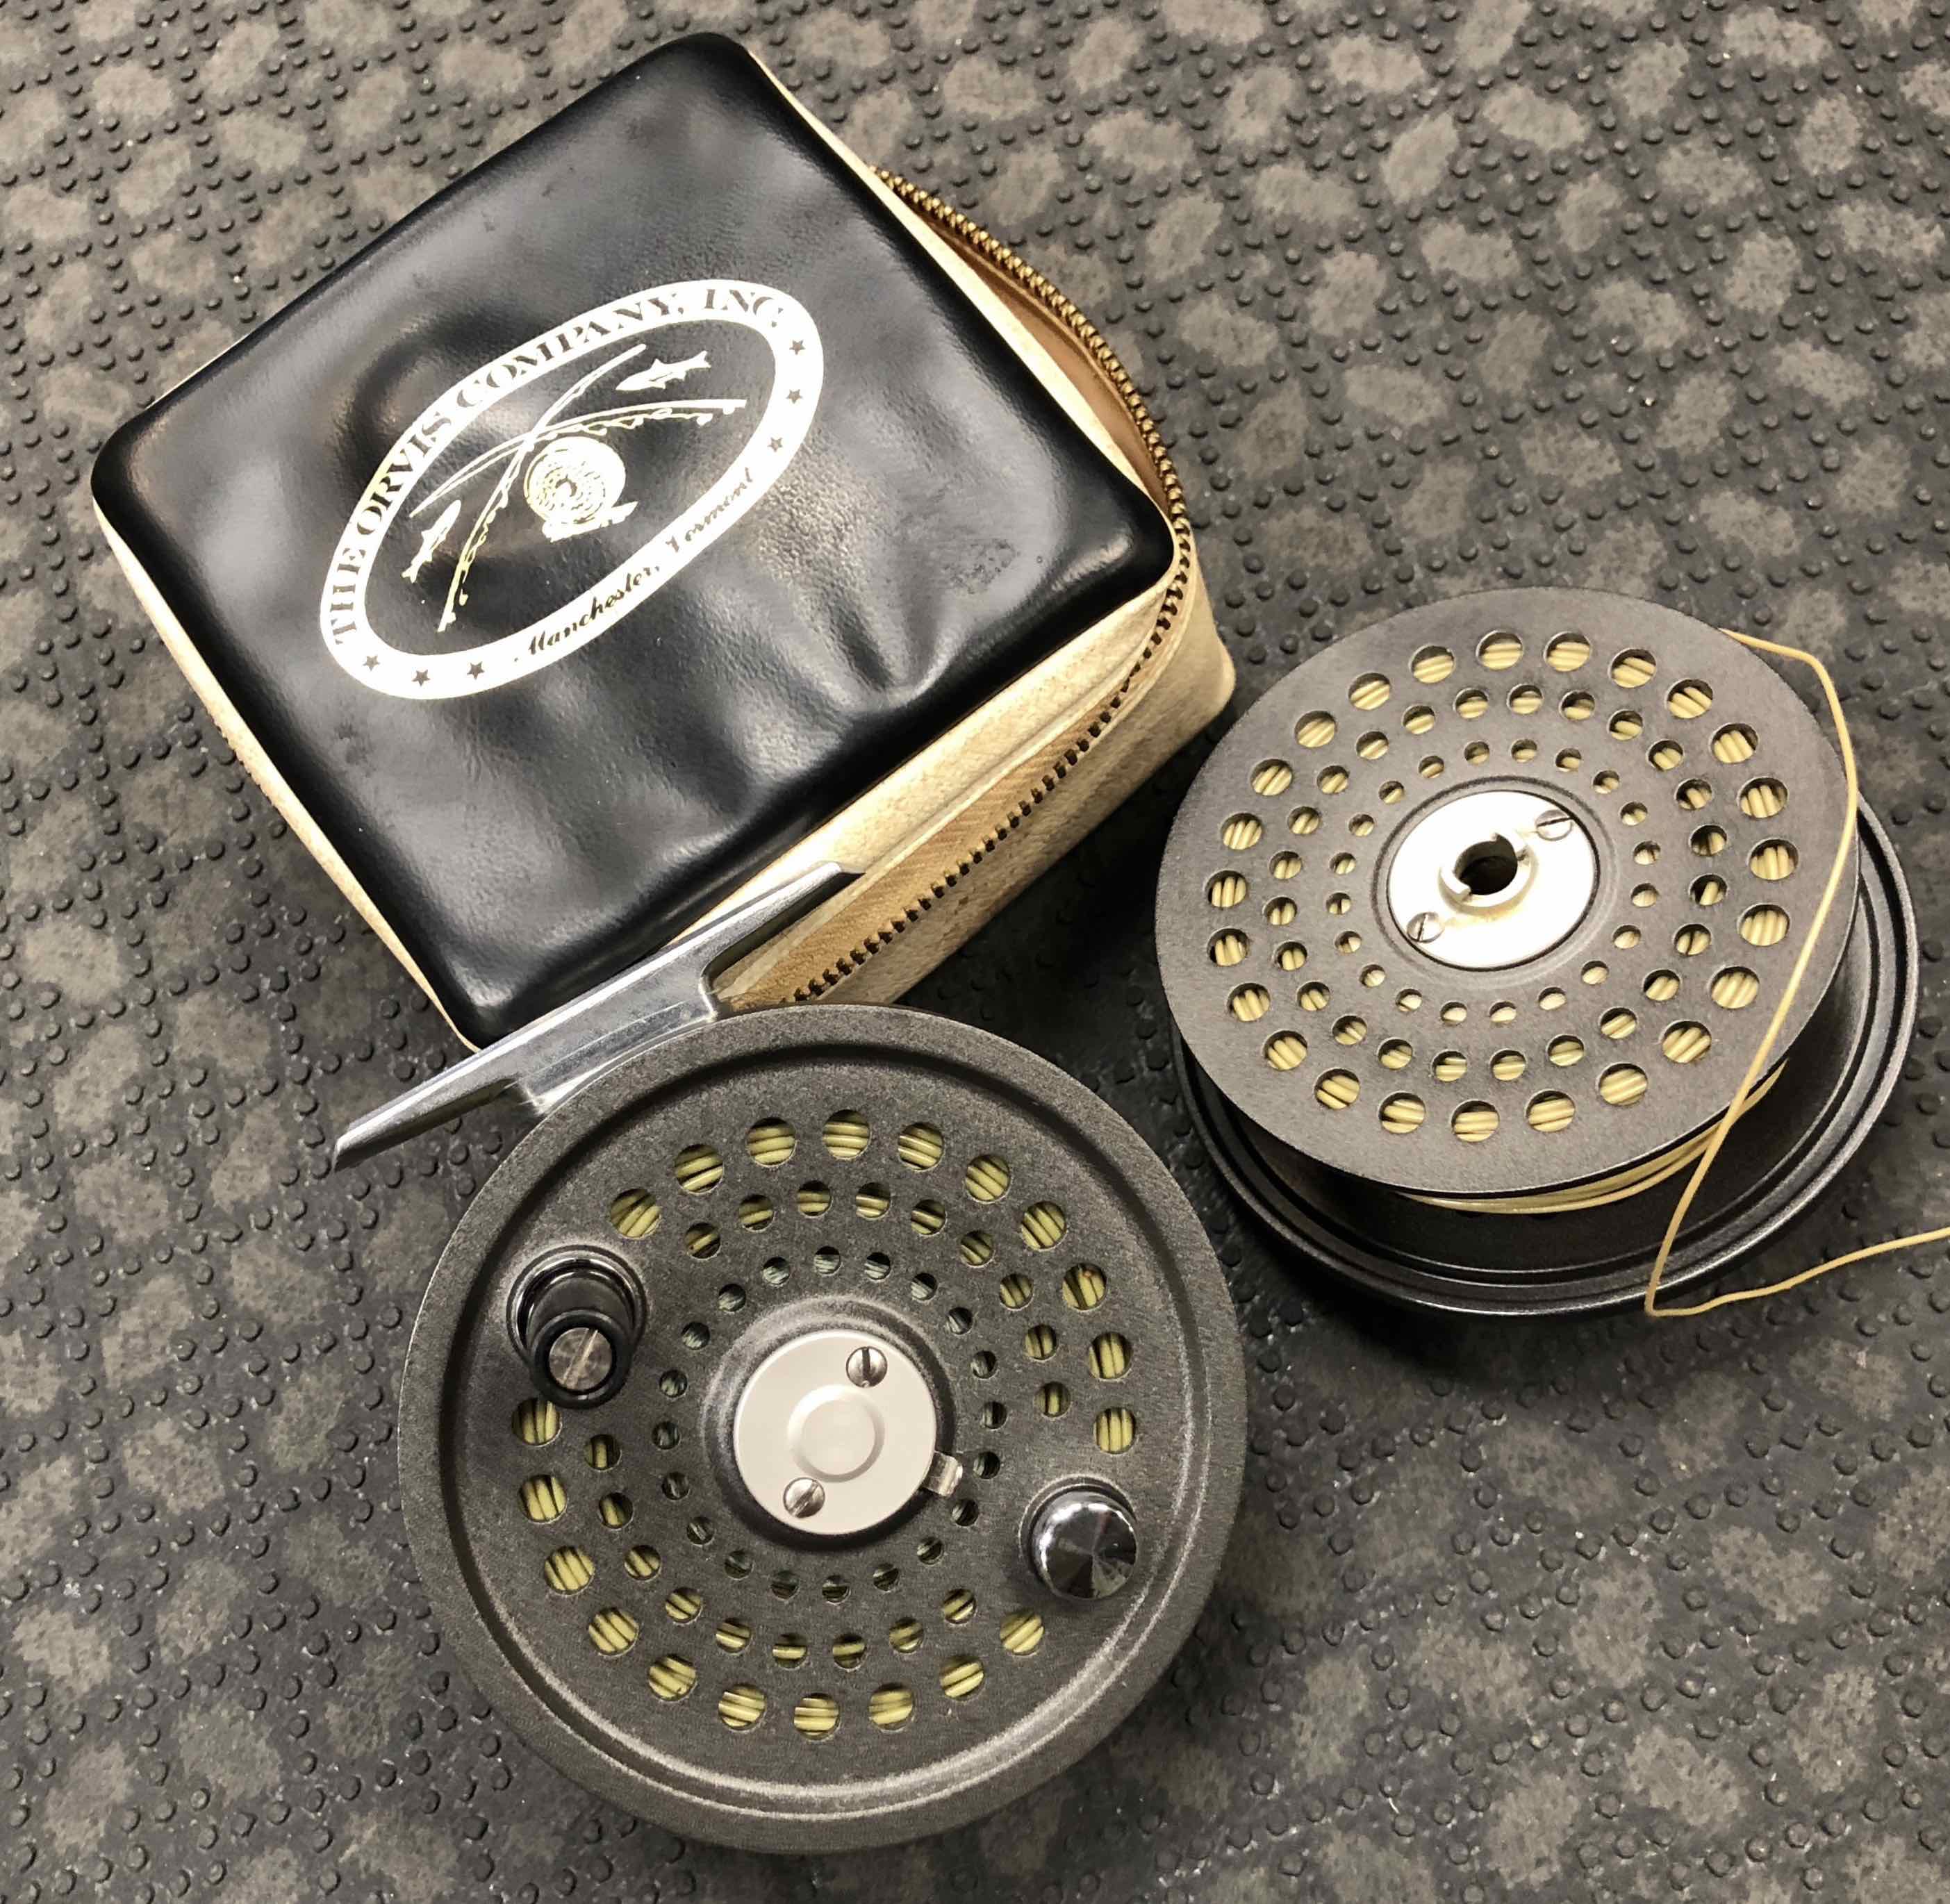 Orvis Battenkill 7/8 Fly Reel, Spare Spool & Zippered Pouch c/w Two Fly Lines - GREAT SHAPE! - $175